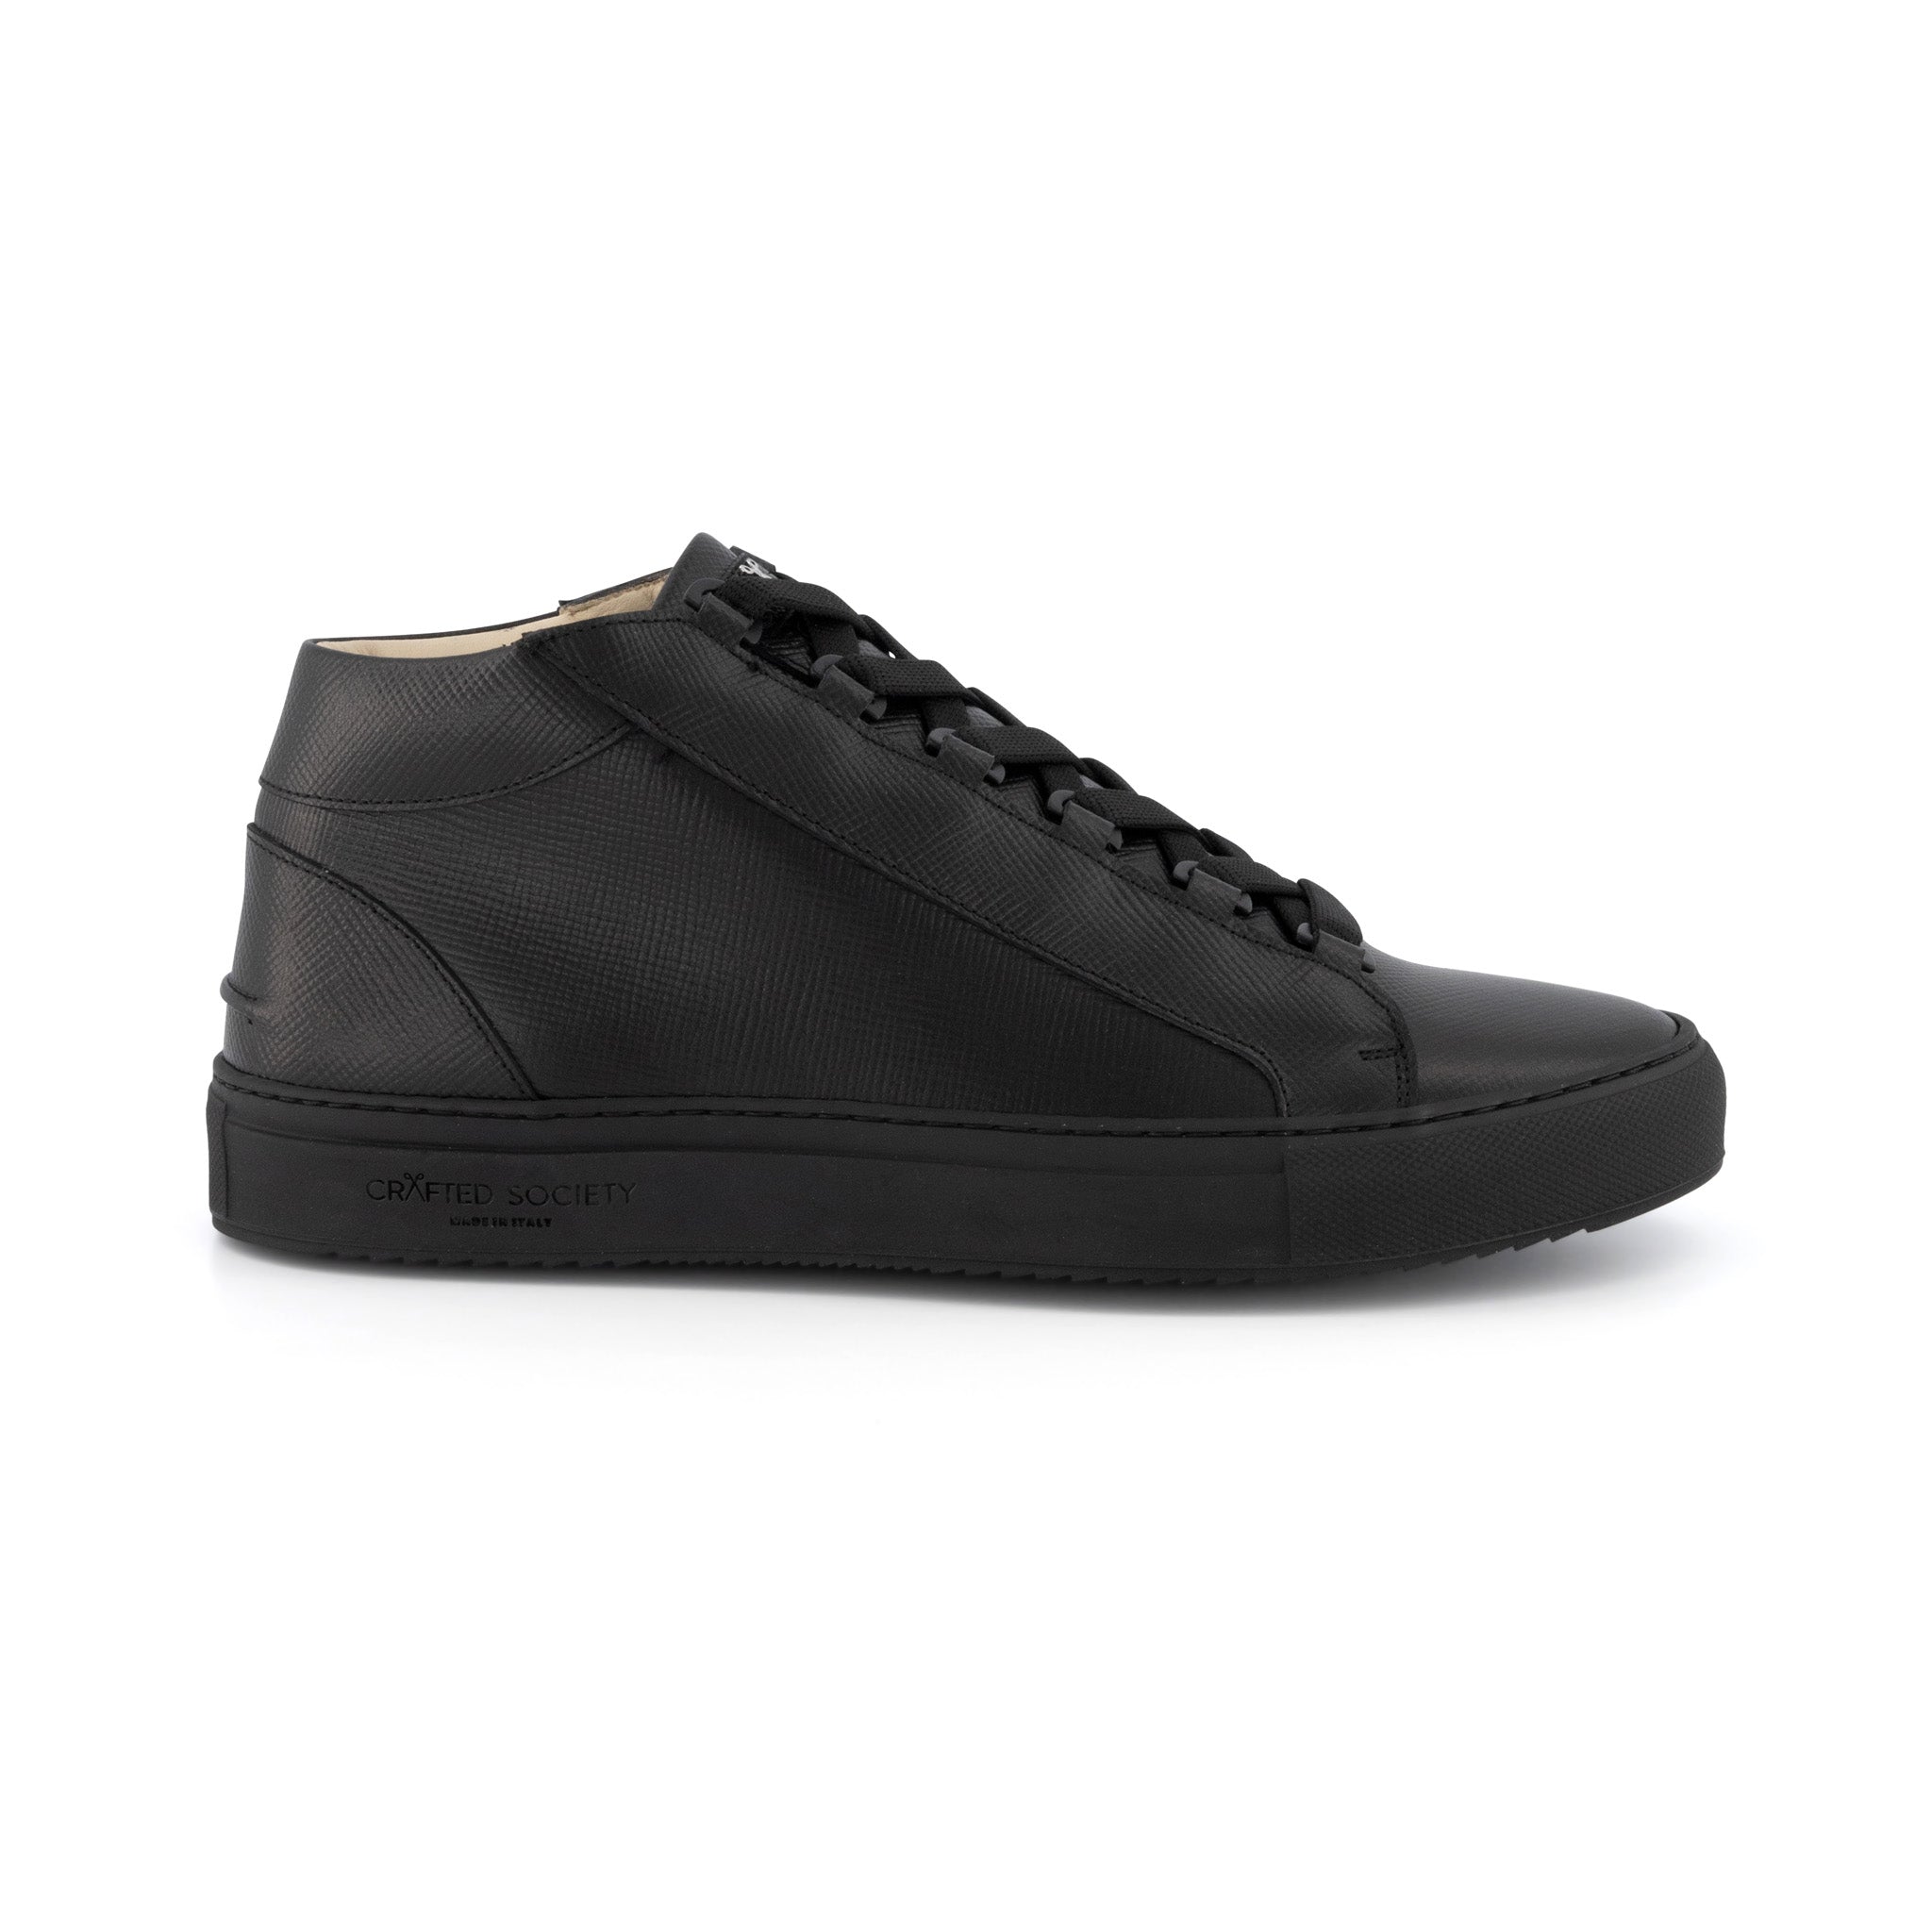 Rico Mid Sneaker | Black Saffiano Leather | Black Outsole | Made in Italy